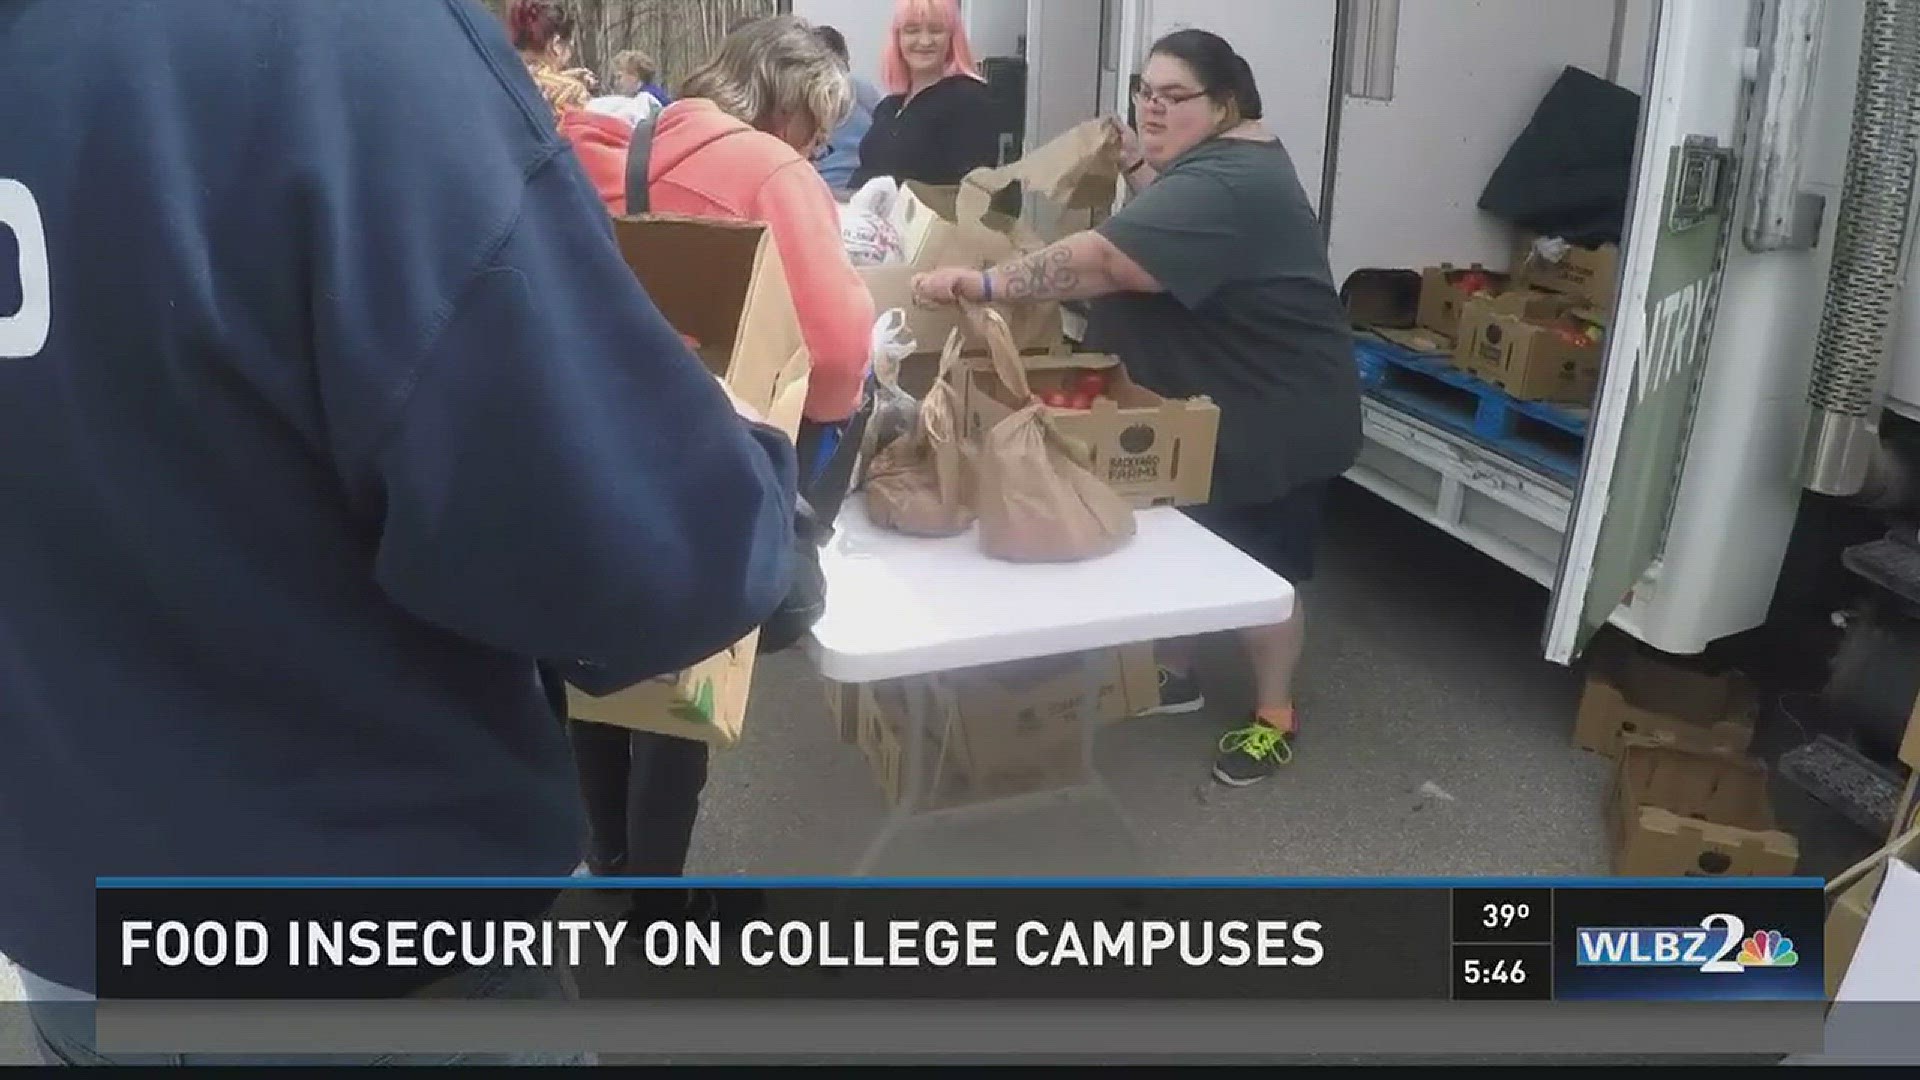 Food insecurity on college campuses